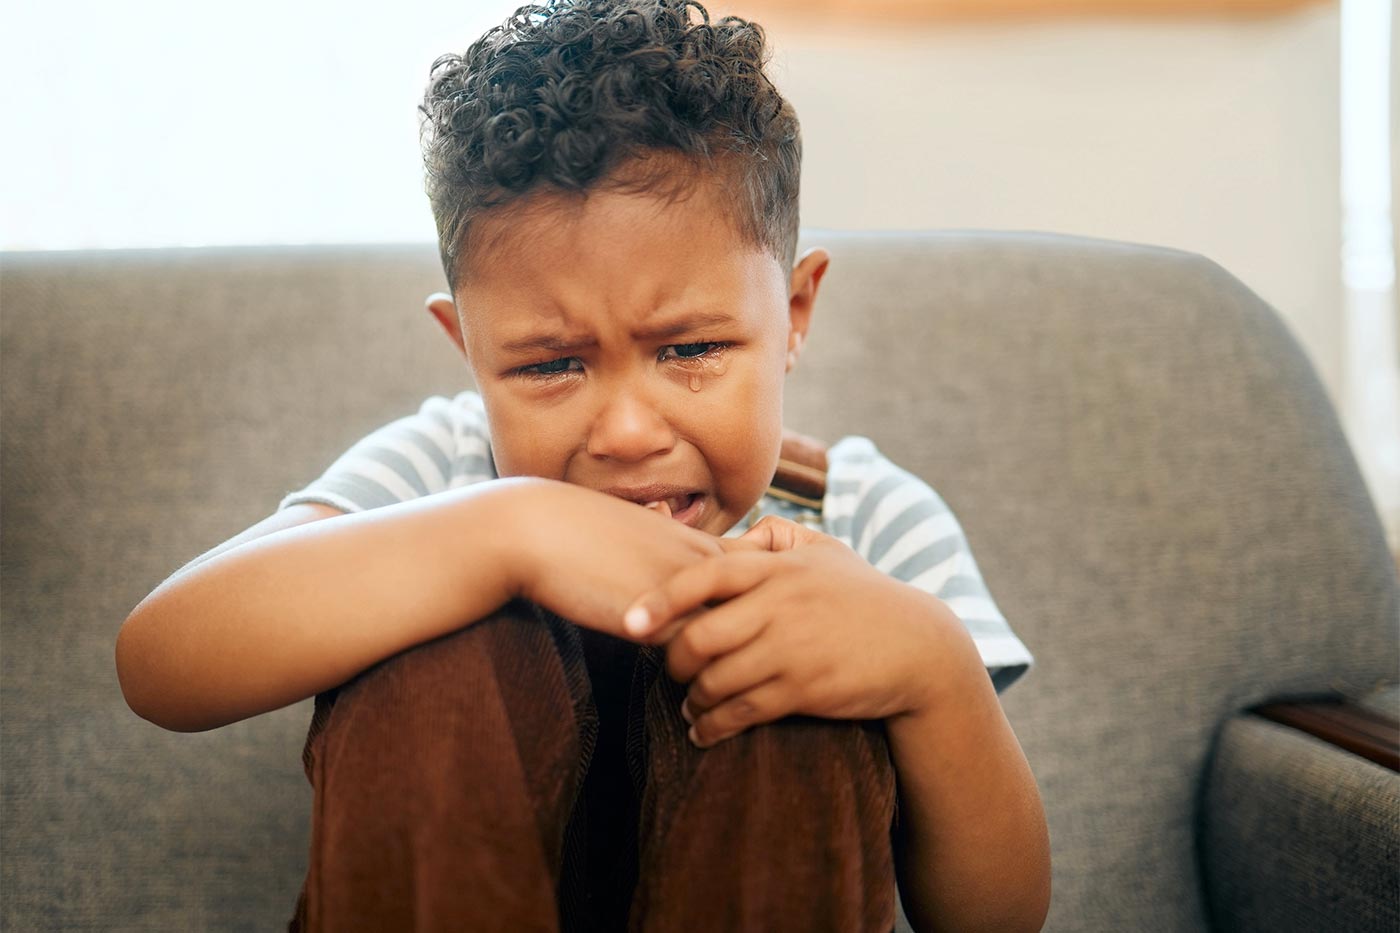 Why You Shouldn't Tell Kids to Stop Crying